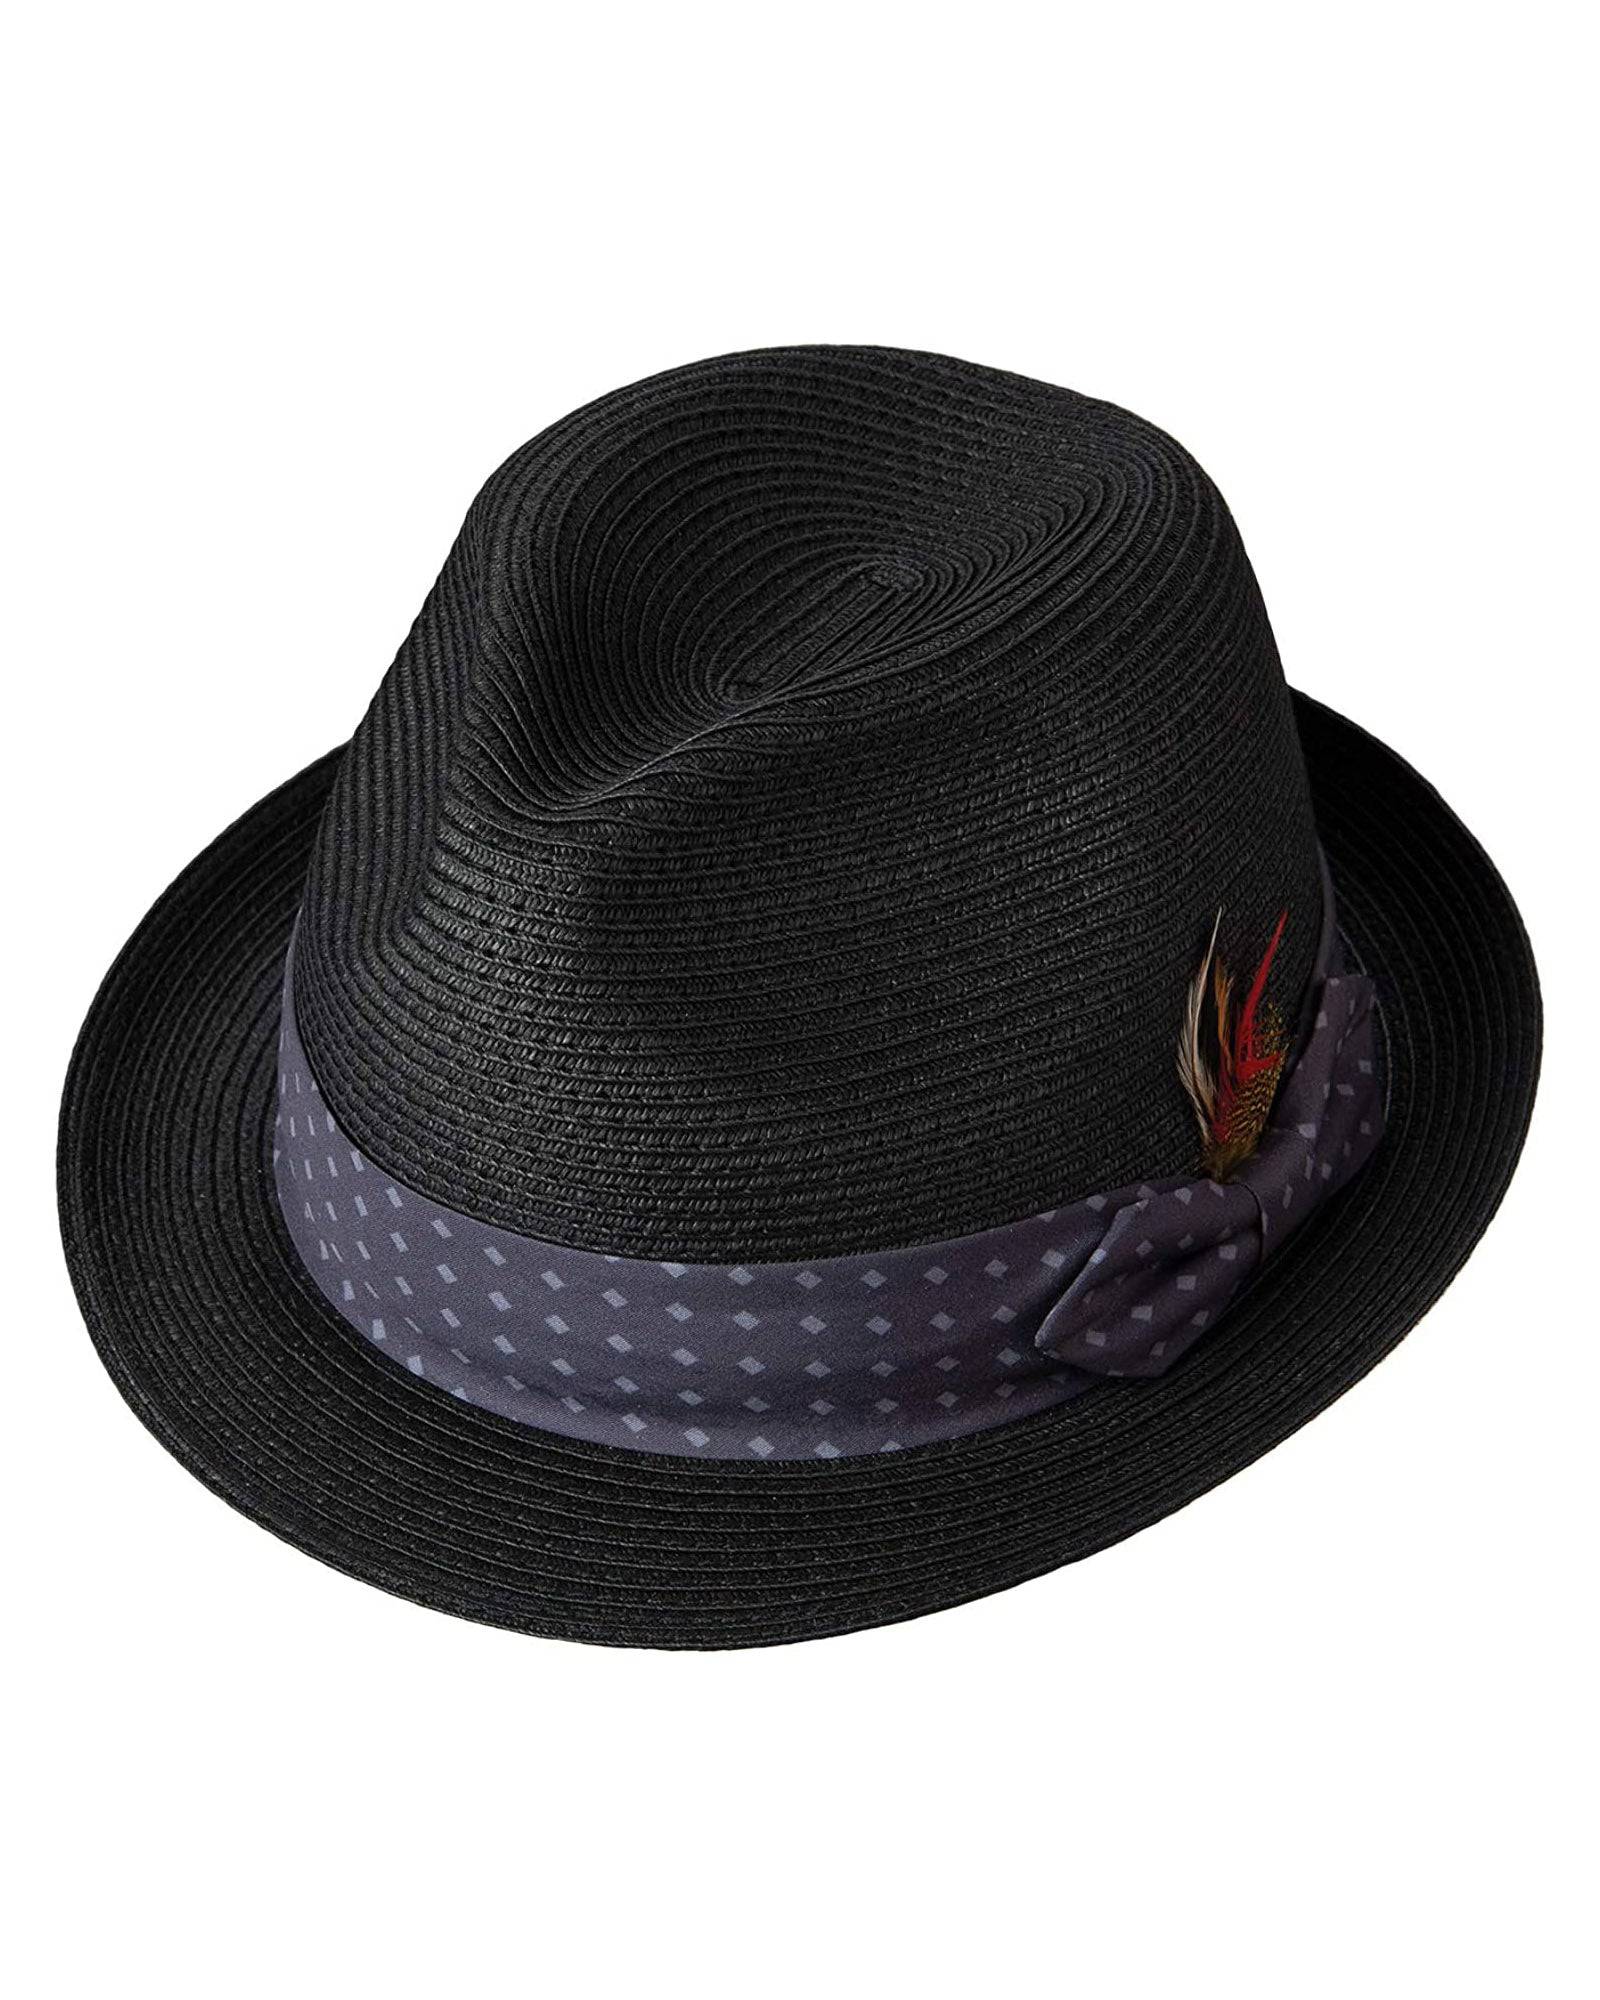 Broner Mens Connoisseur Pinch Front Straw Fedora with Contrast Color Dotted Band In Black - Rainwater's Men's Clothing and Tuxedo Rental